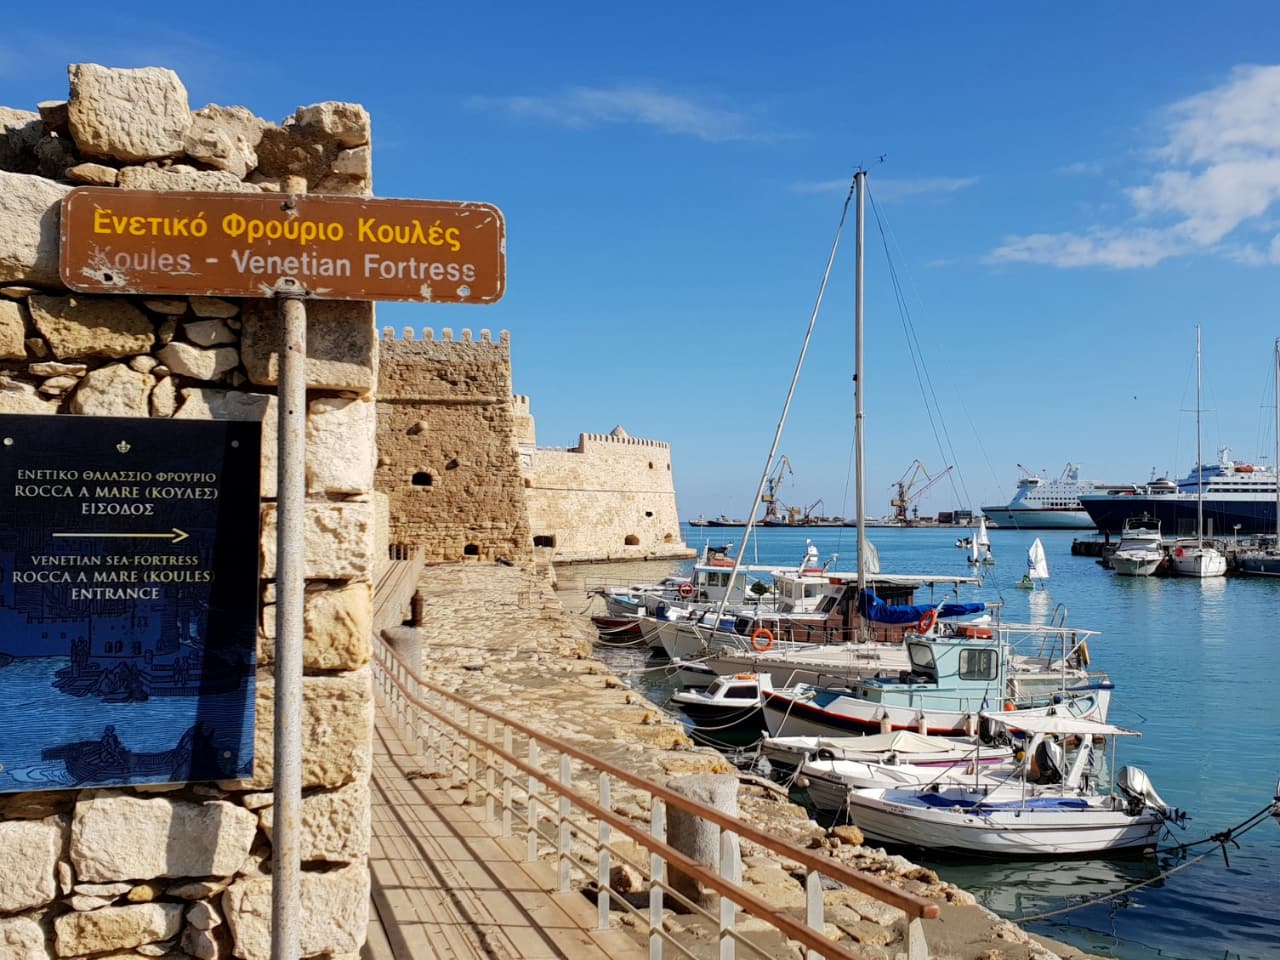 Air France to Connect Heraklion with Paris for the First Time